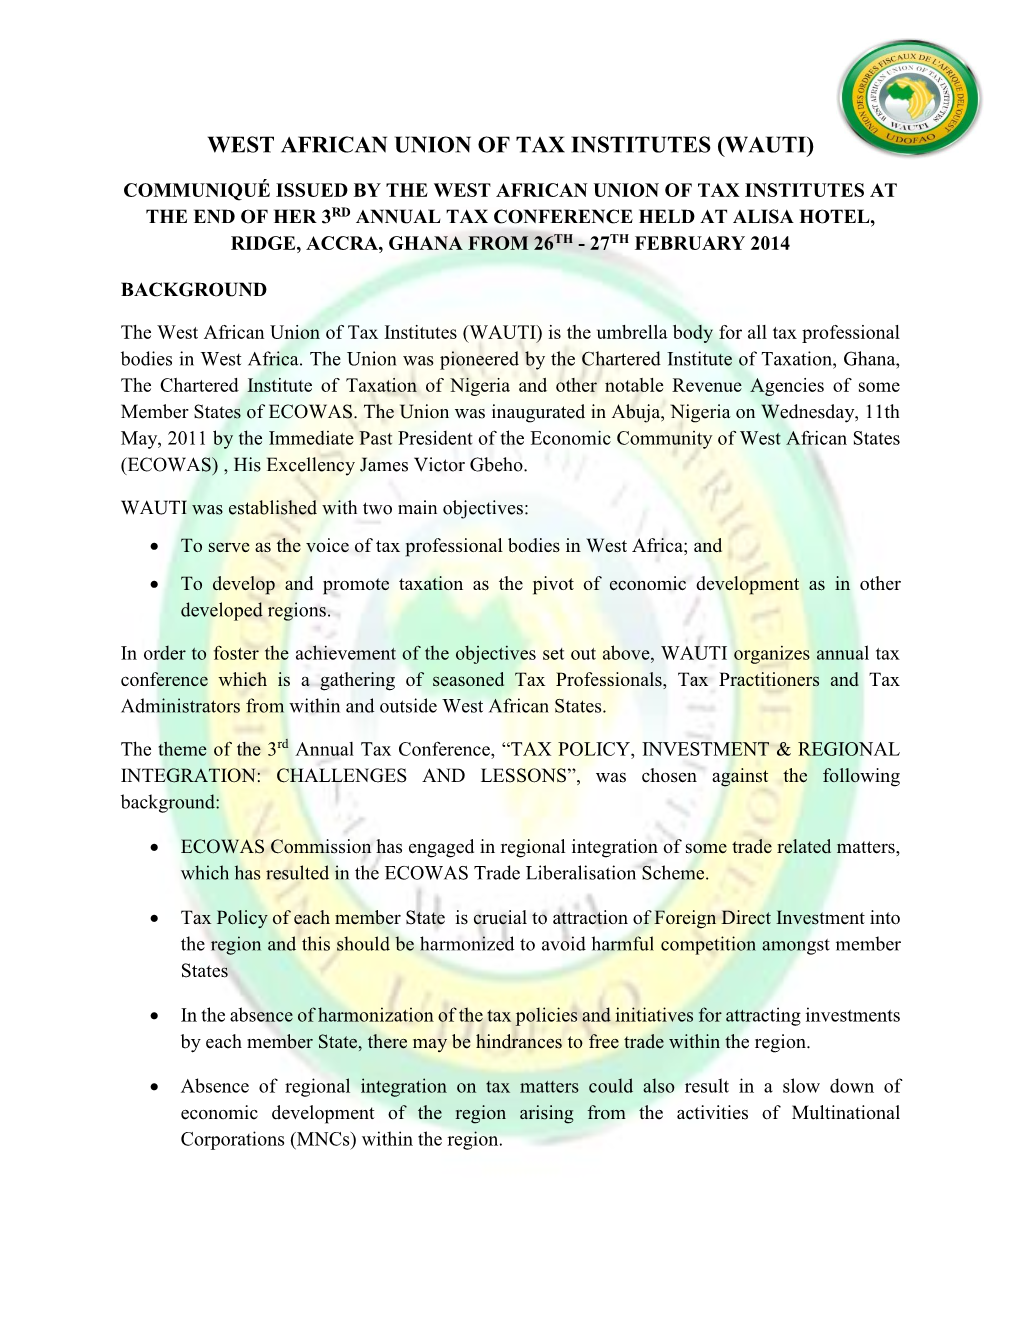 West African Union of Tax Institutes (Wauti)